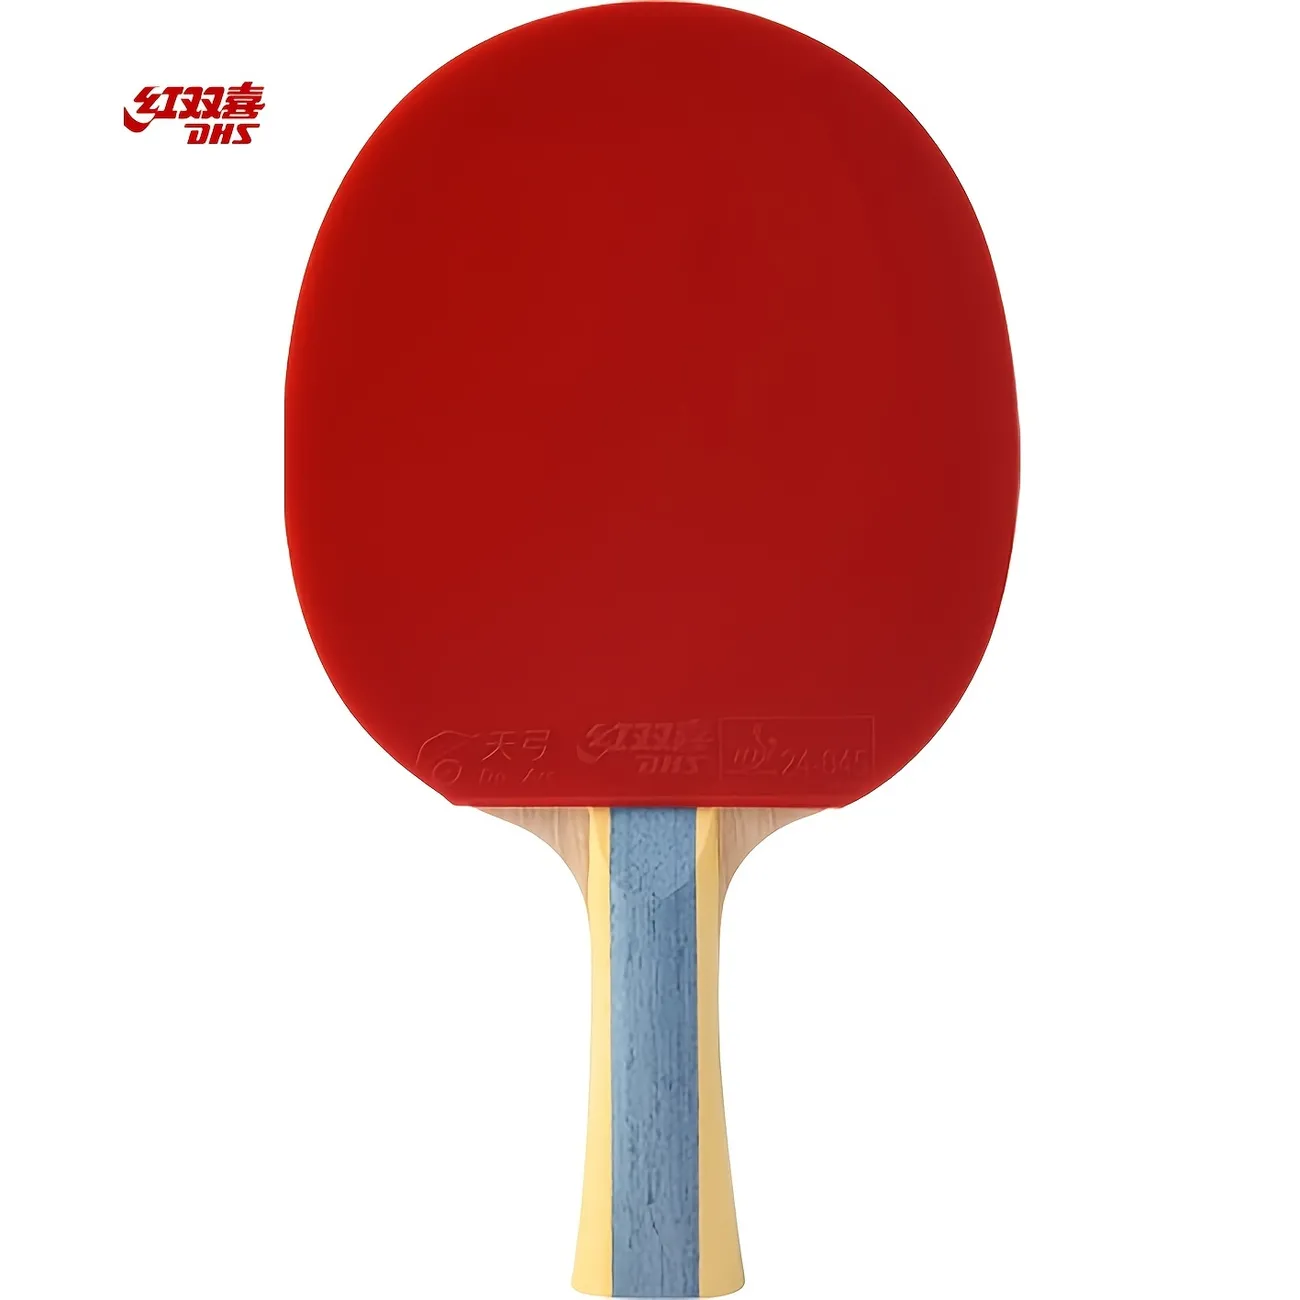 Compete At Your Best Dhs H6002 6 Stars Double Sided Reverse Rubber Table Tennis Racket For Competition Training